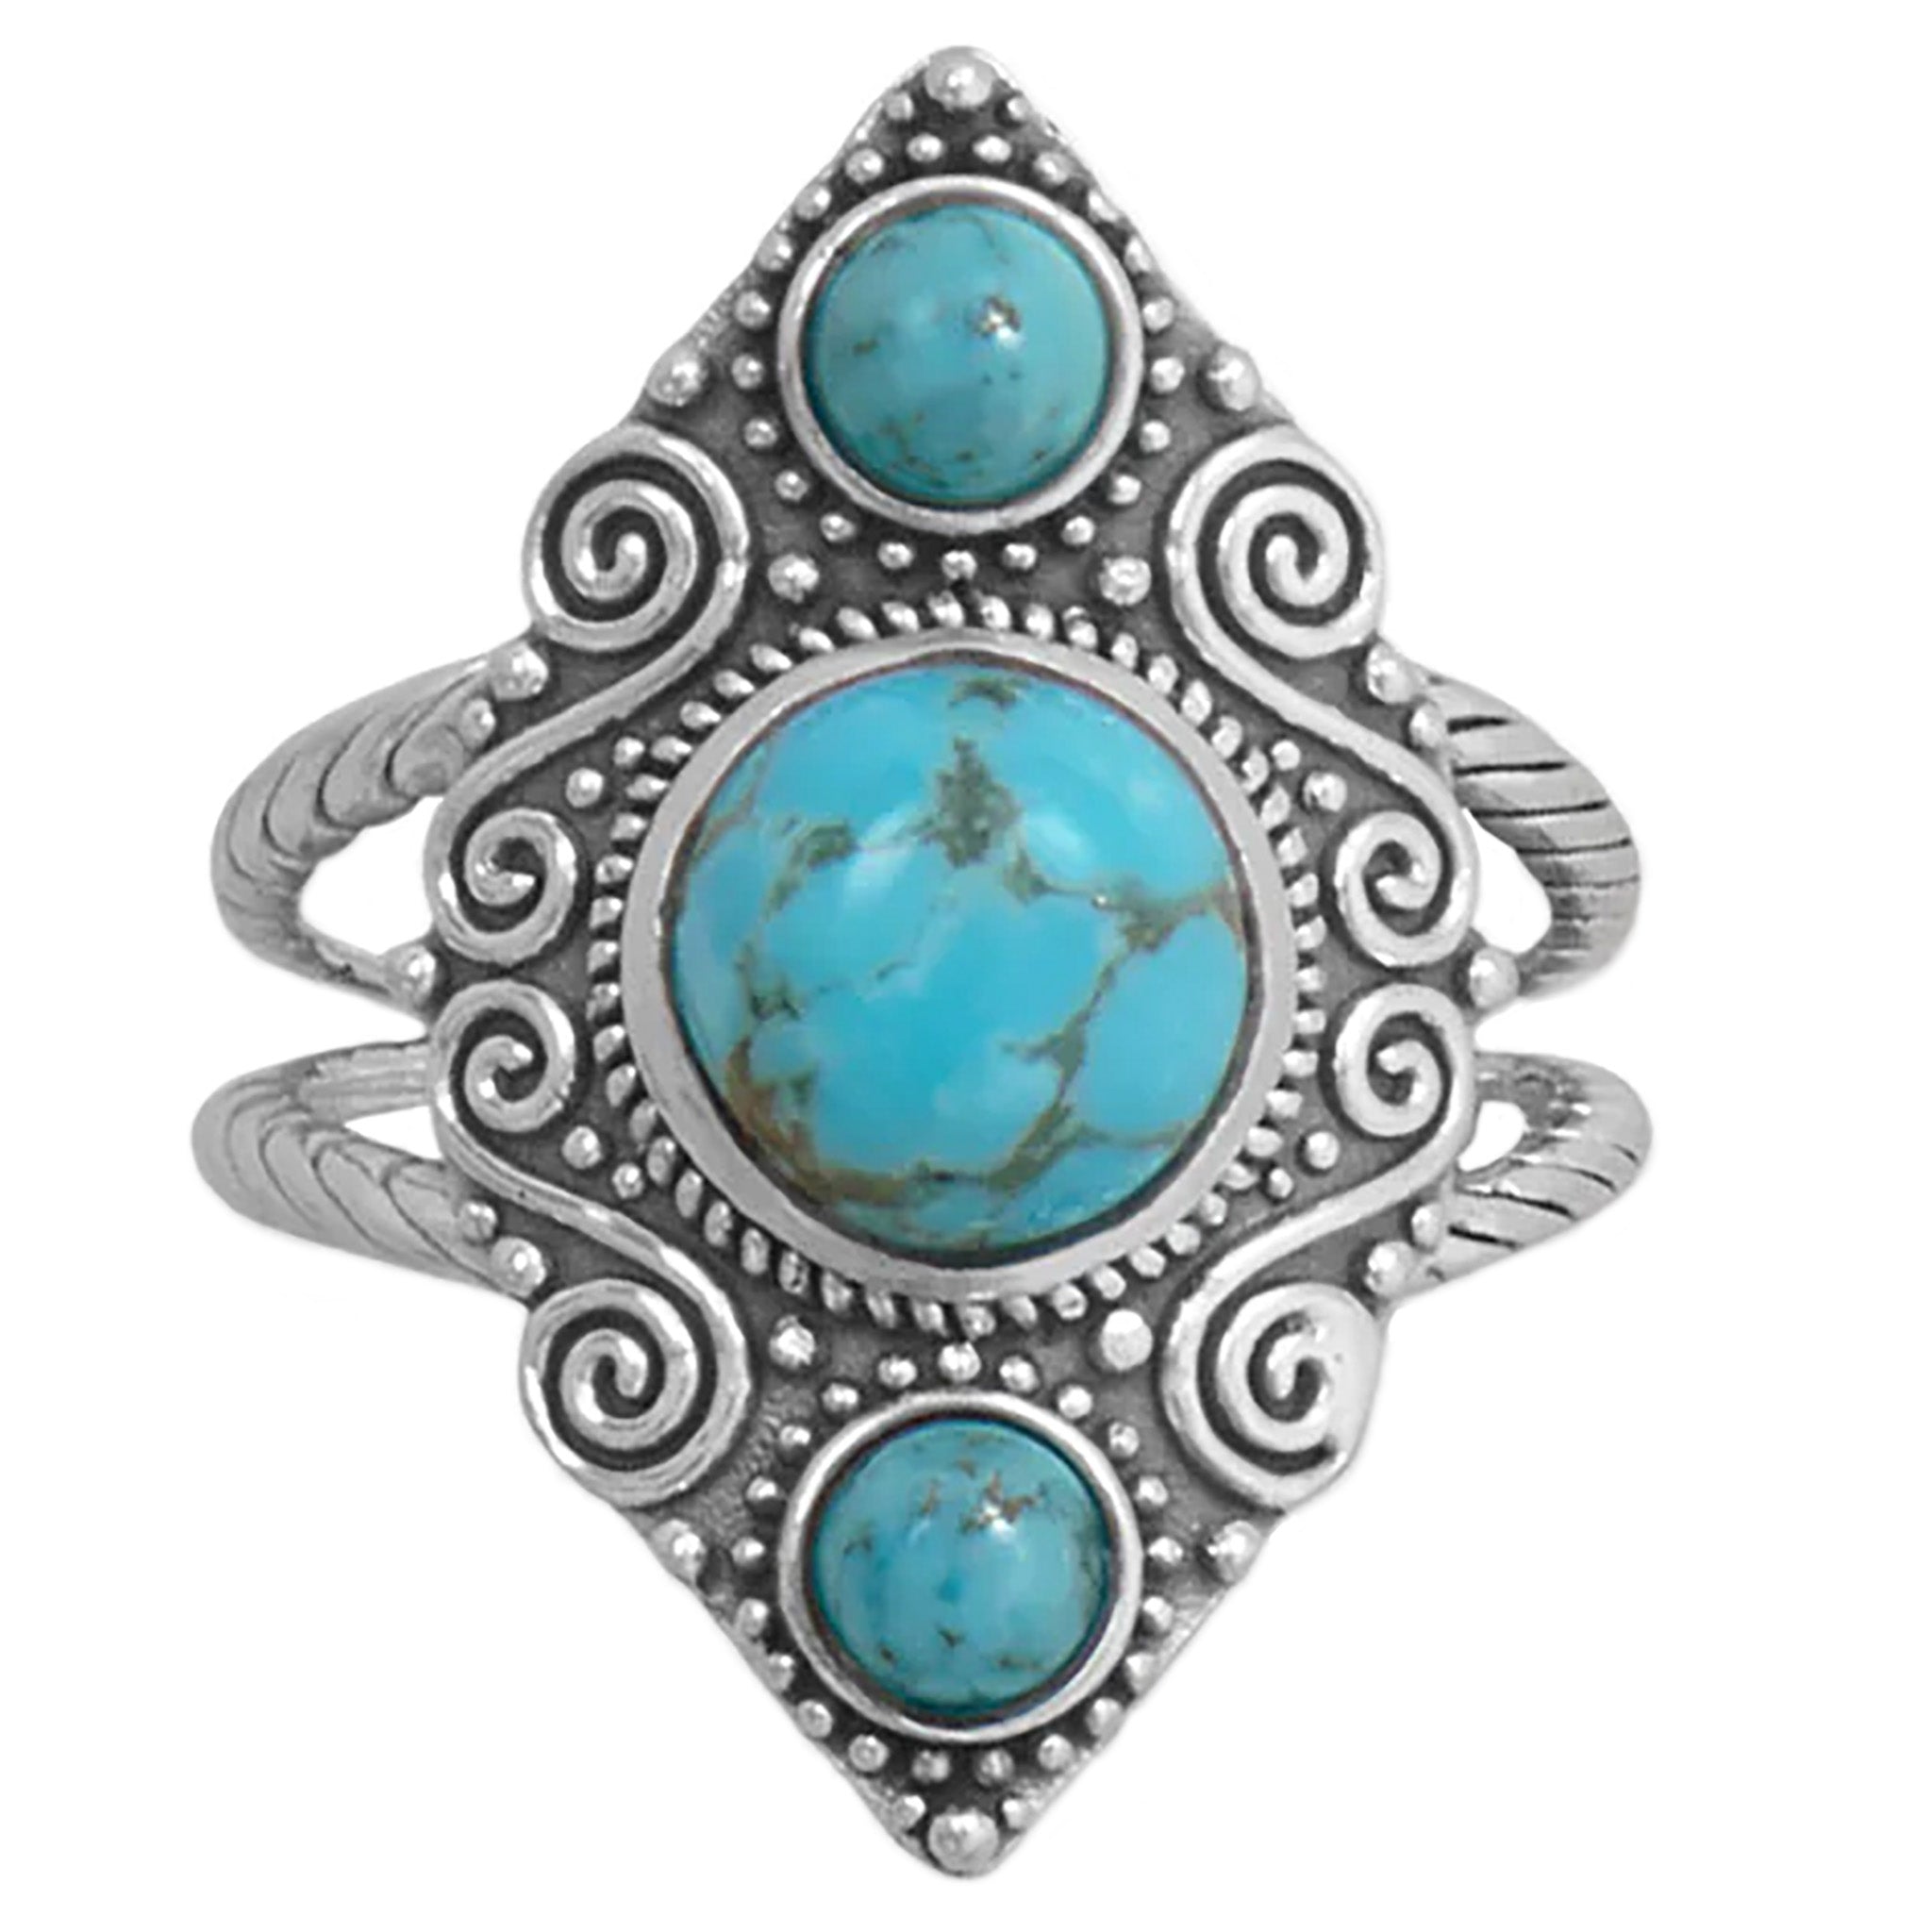 Scroll and Bead Design Turquoise Ring